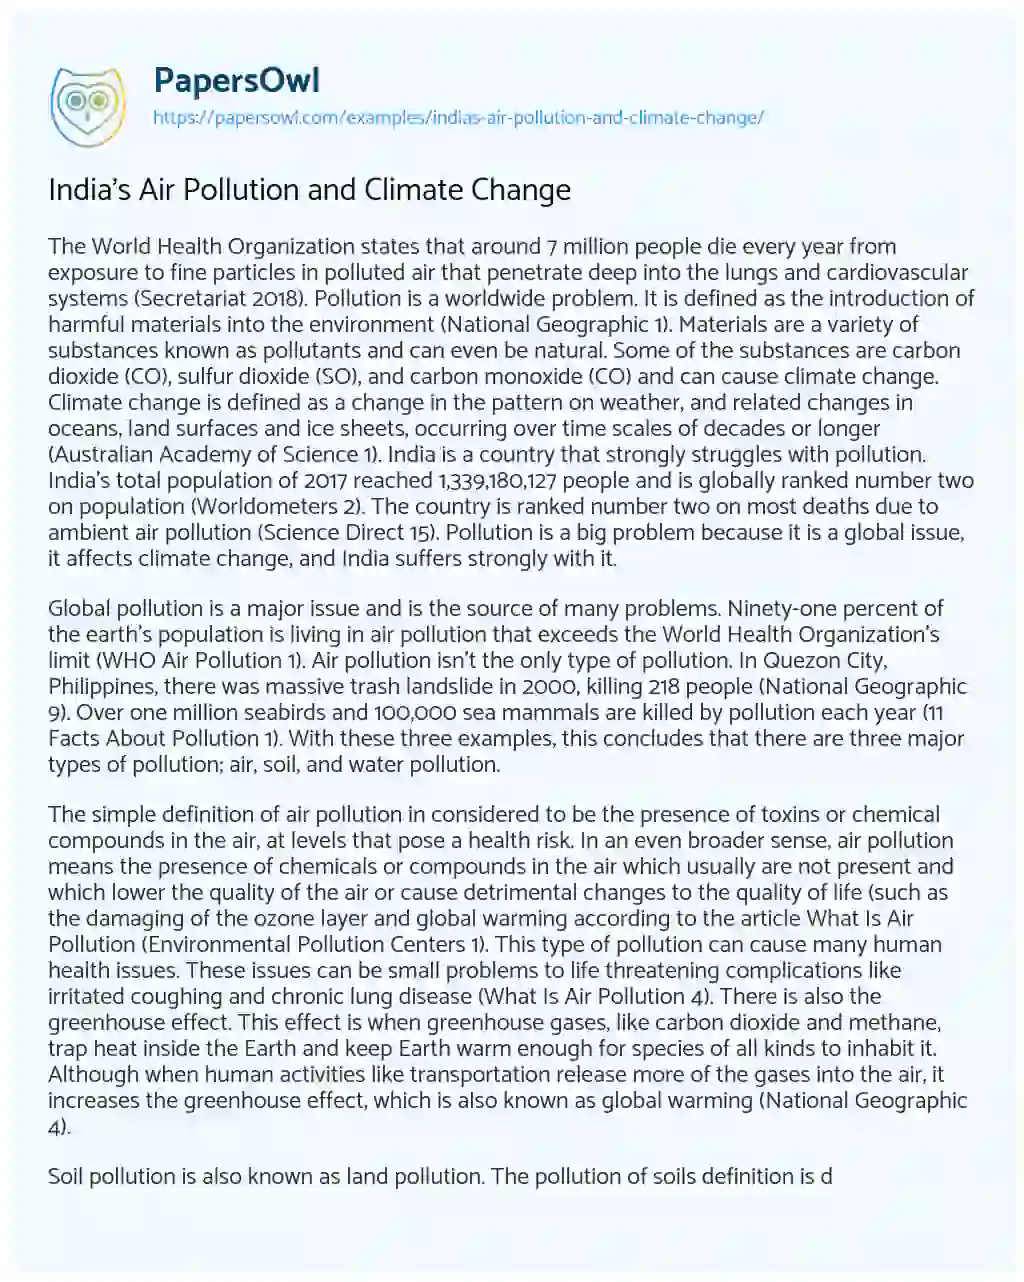 India’s Air Pollution and Climate Change essay